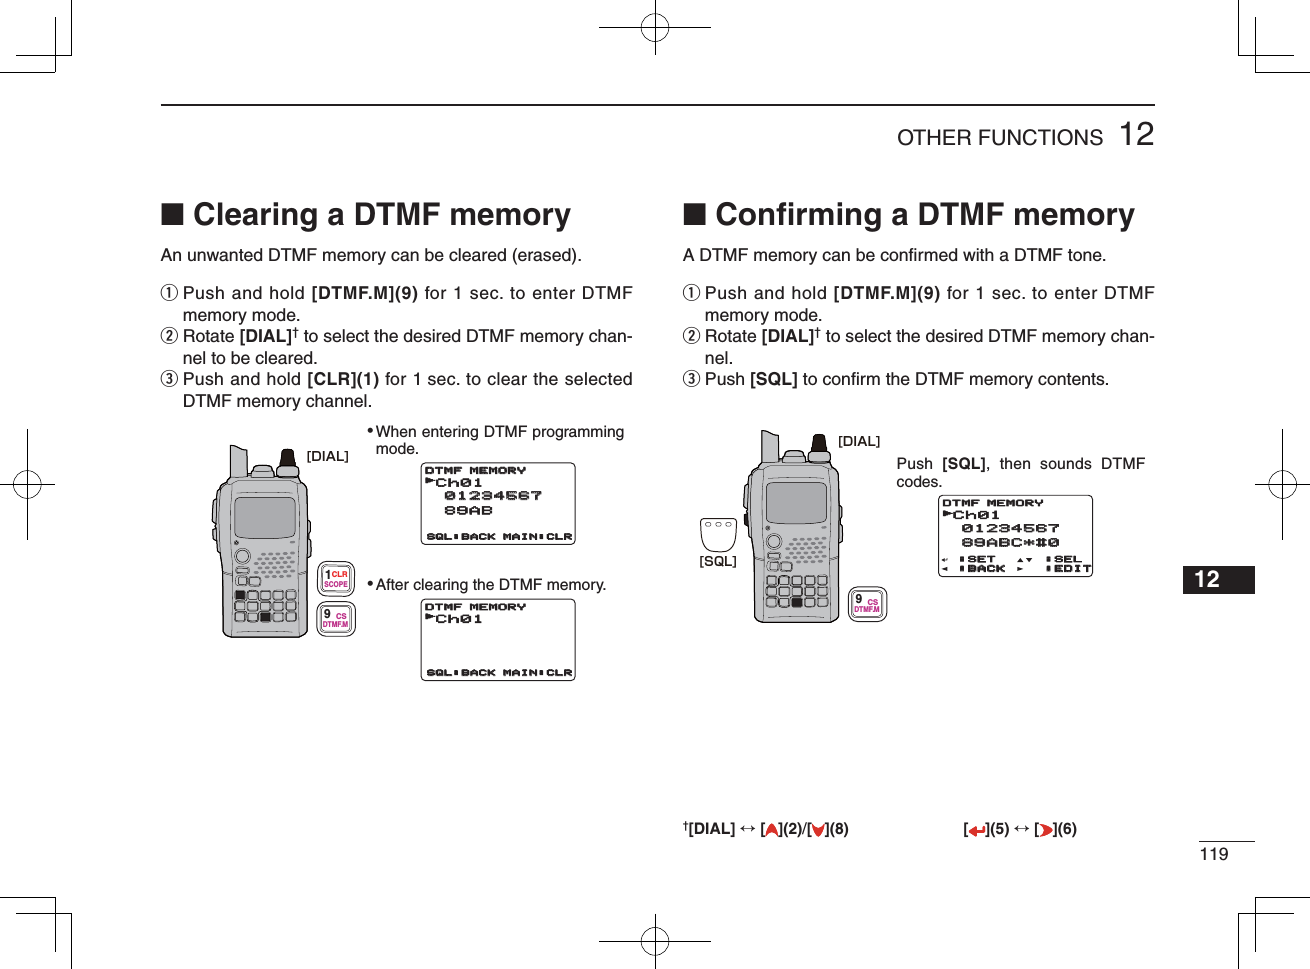 11912OTHER FUNCTIONS12345678910111213141516171819■ Clearing a DTMF memoryAn unwanted DTMF memory can be cleared (erased).q  Push and hold [DTMF.M](9) for 1 sec. to enter DTMF memory mode.w  Rotate [DIAL]† to select the desired DTMF memory chan-nel to be cleared.e  Push and hold [CLR](1) for 1 sec. to clear the selected DTMF memory channel.■ Conﬁ rming a DTMF memoryA DTMF memory can be conﬁ rmed with a DTMF tone.q  Push and hold [DTMF.M](9) for 1 sec. to enter DTMF memory mode.w  Rotate [DIAL]† to select the desired DTMF memory chan-nel.e Push [SQL] to conﬁ rm the DTMF memory contents.••When entering DTMF programming mode.After clearing the DTMF memory.Ch01 01234567 01234567 89ABSQL:BACKSQL:BACK MAIN:CLRMAIN:CLRDTMF MEMORYDTMF MEMORYrCh01SQL:BACKSQL:BACK MAIN:CLRMAIN:CLRDTMF MEMORYDTMF MEMORYrCh01 01234567 89ABC*#0:SET:BACK:SEL:EDITDTMF MEMORY[DIAL]19SCOPEDTMF.MCSCLRPush  [SQL], then sounds DTMF codes.Ch01 01234567 89ABSQL:BACK MAIN:CLRDTMF MEMORYCh01SQL:BACK MAIN:CLRDTMF MEMORYCh01 01234567 01234567 89ABC*#0 89ABC*#0:SET:SET:BACK:BACK:SEL:SEL:EDIT:EDITDTMF MEMORYDTMF MEMORYr[SQL][DIAL]9DTMF.MCS†[DIAL] ↔ [ ](2)/[](8) [ ](5) ↔ [ ](6)